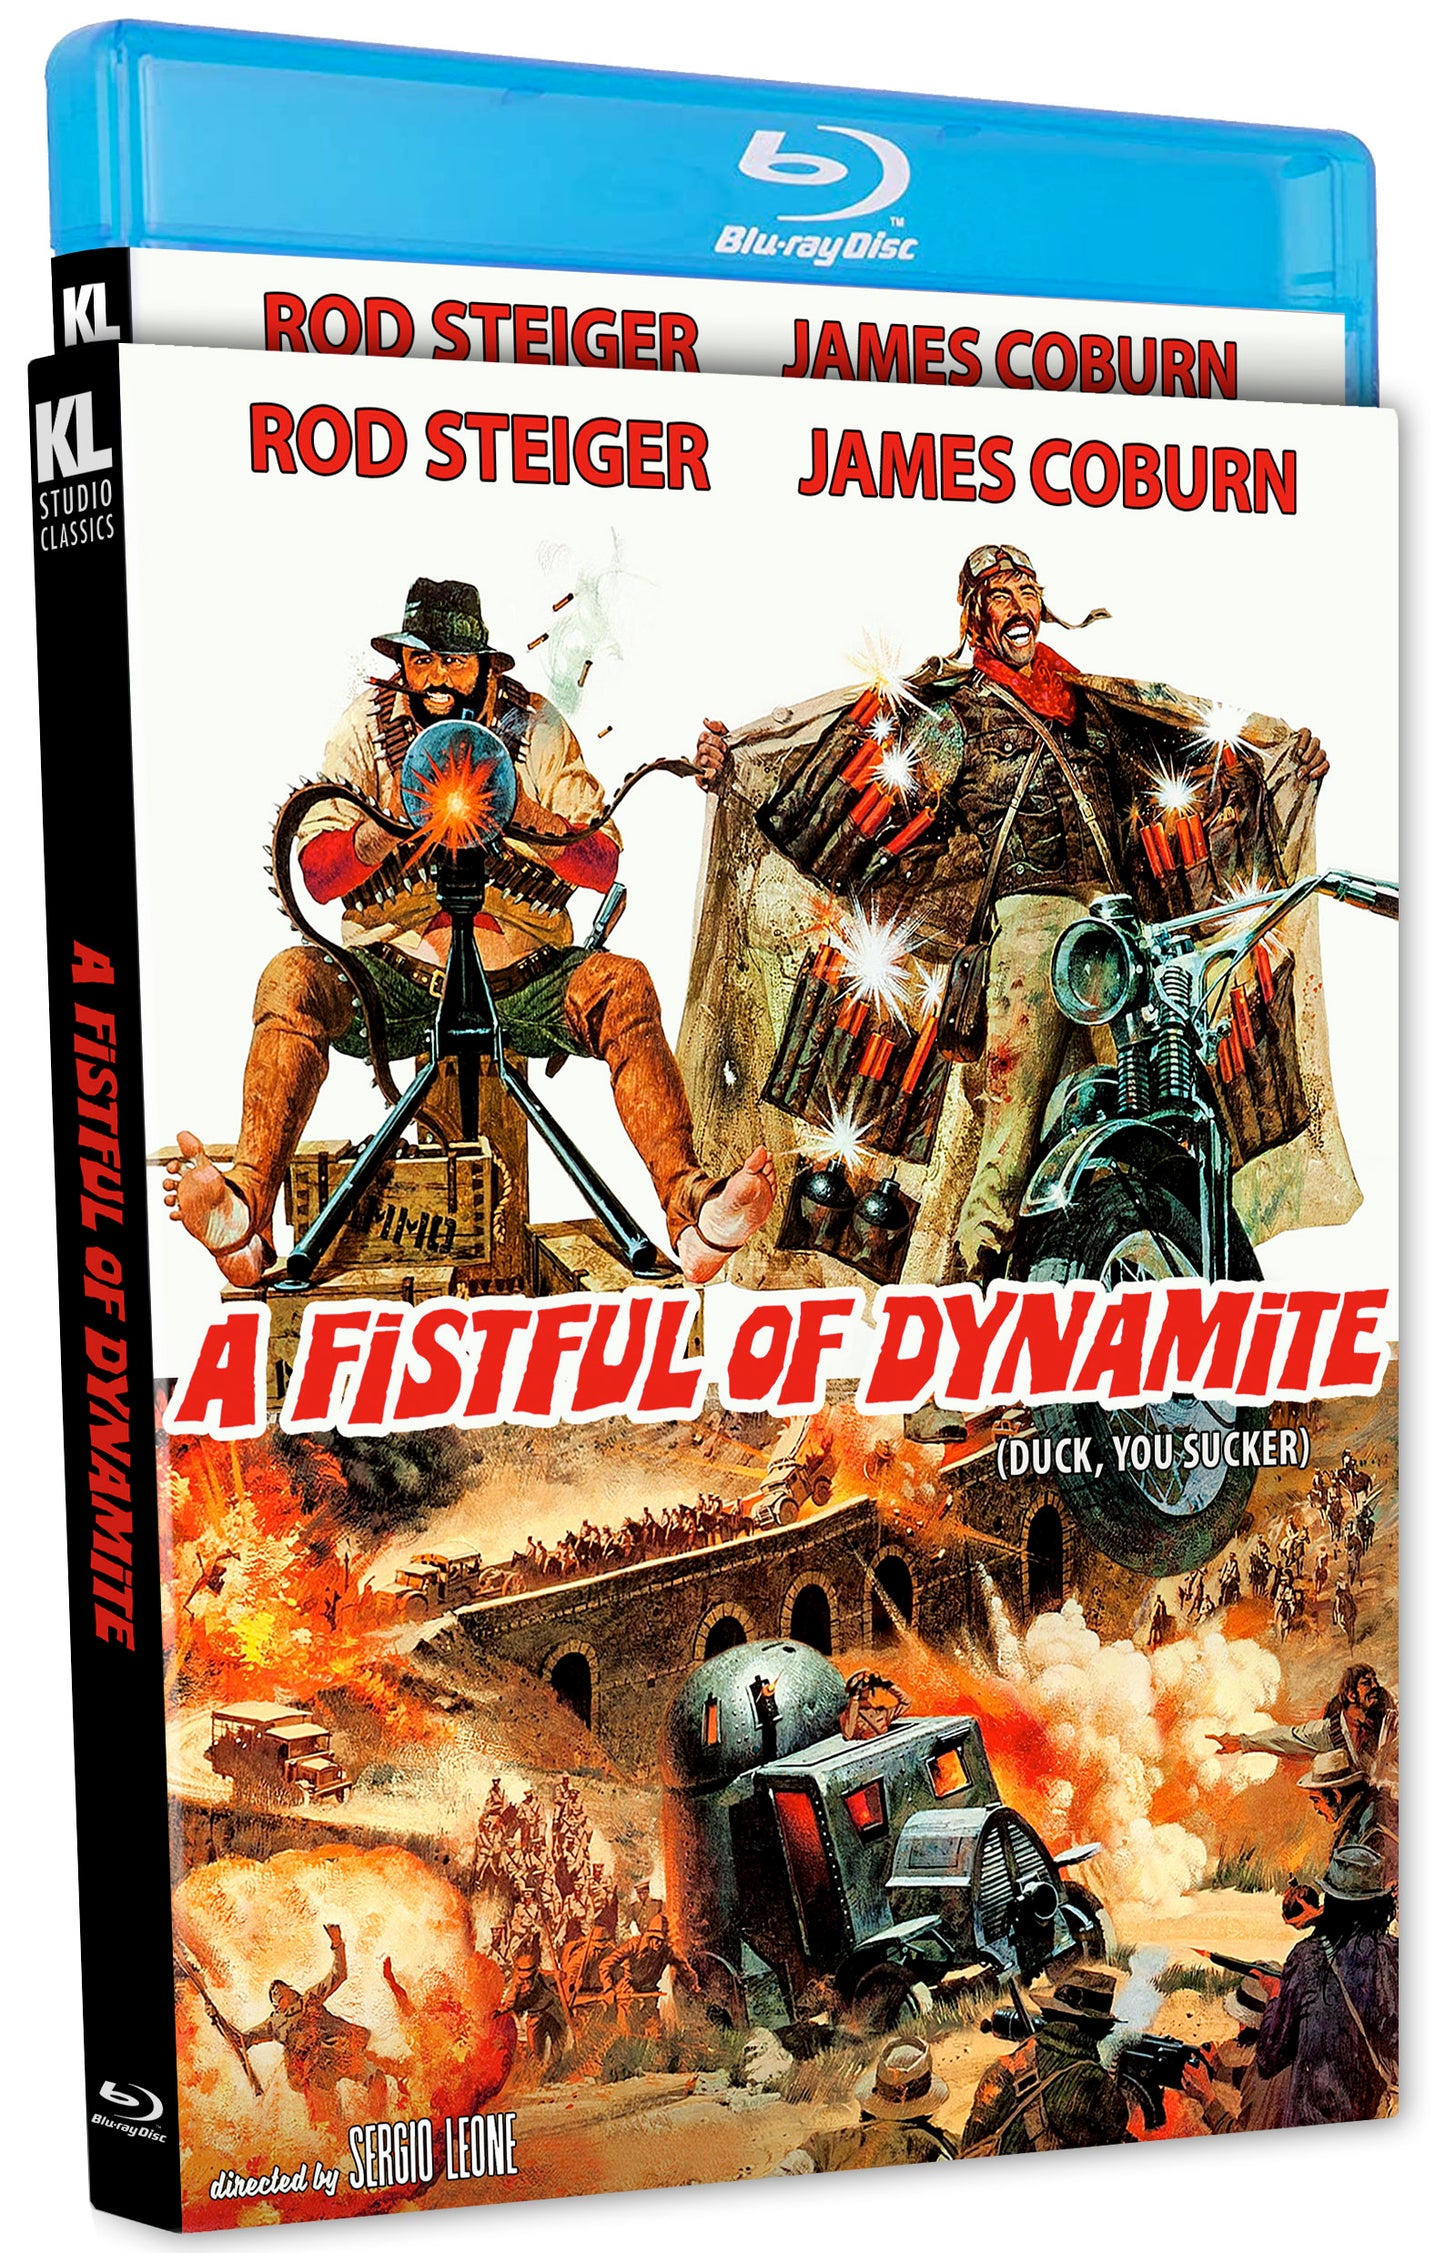 A Fistful of Dynamite (Aka Duck, You Sucker) Special Edition Blu-ray with Slipcover (Kino Lorber)